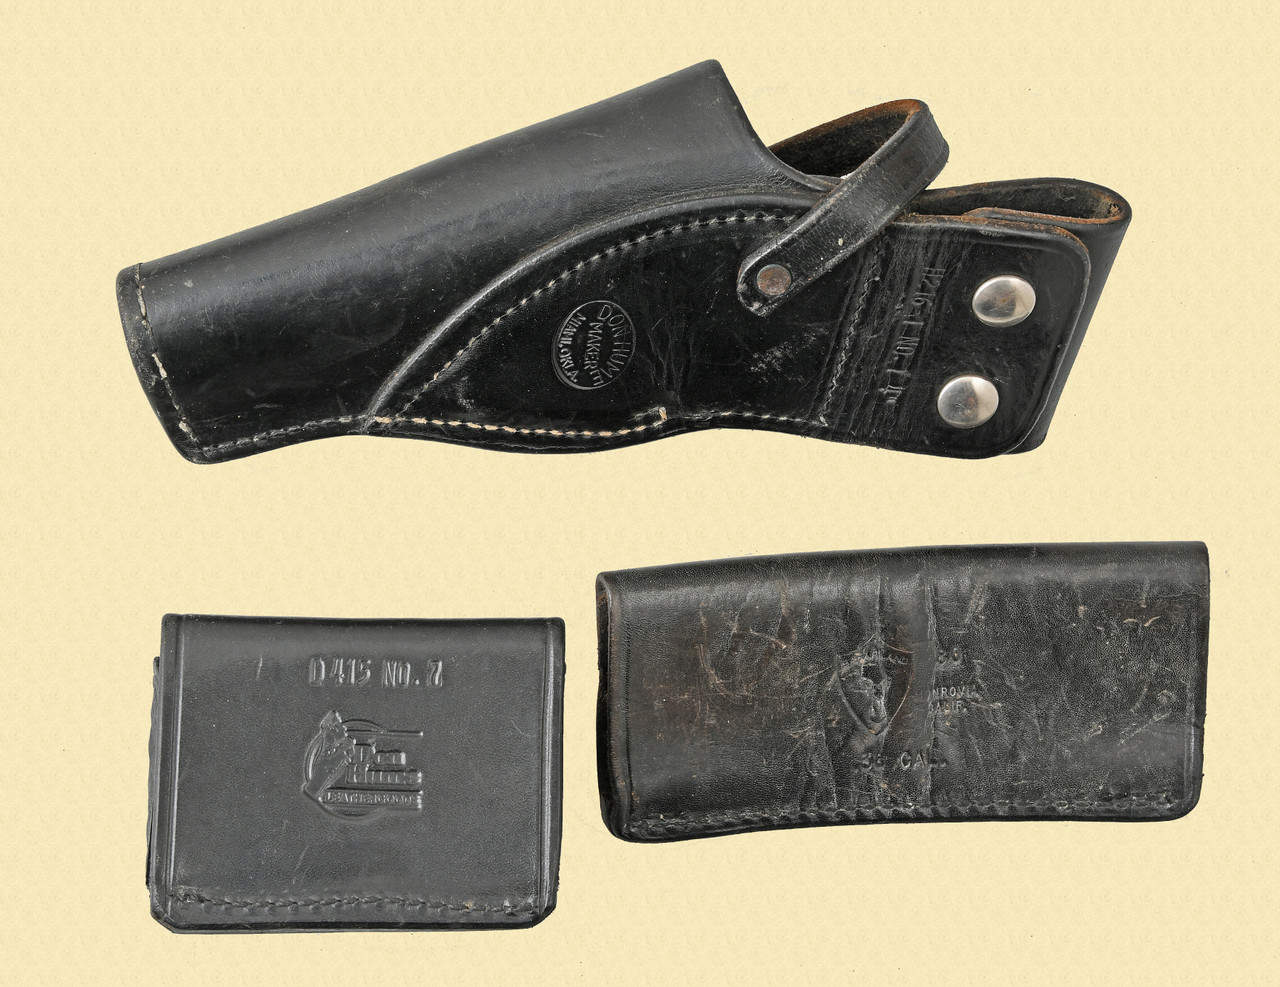 HUME HOLSTER W/ACCESSORIES - C63026